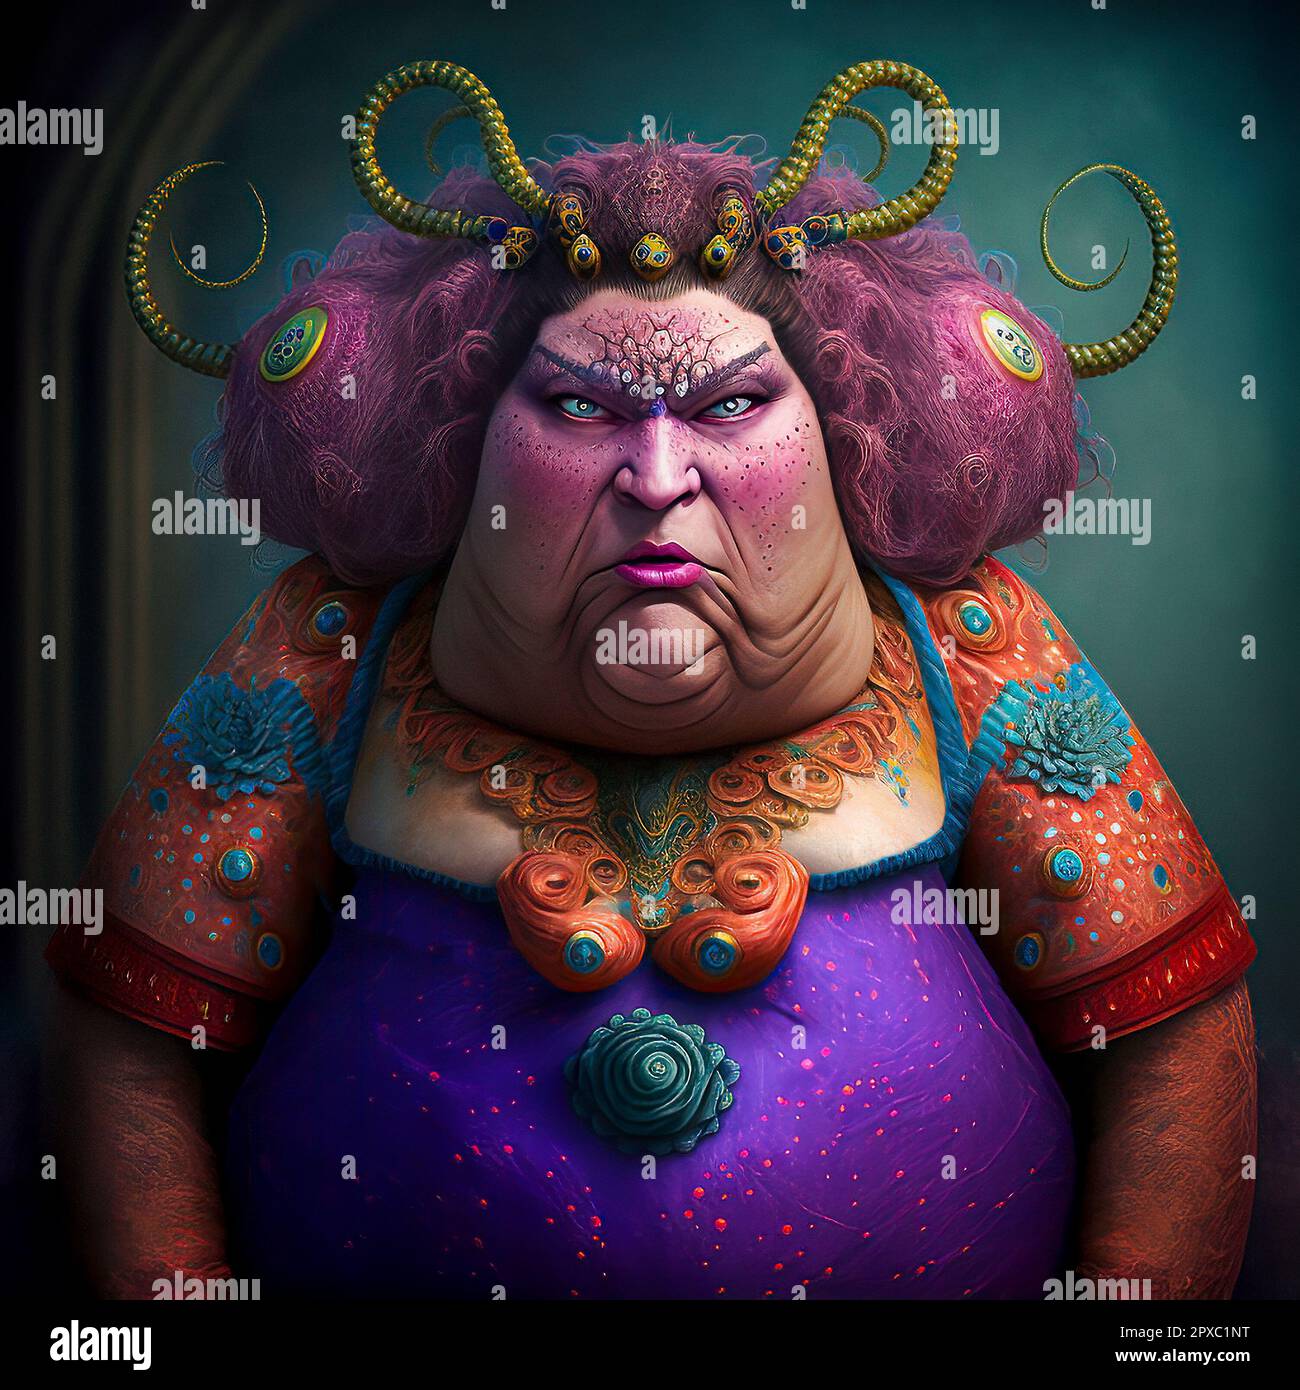 Colorful Character Portrait, an Older Woman With Bloated Body, Angry Face, Pink Hair and Horns on Her Head Stock Photo